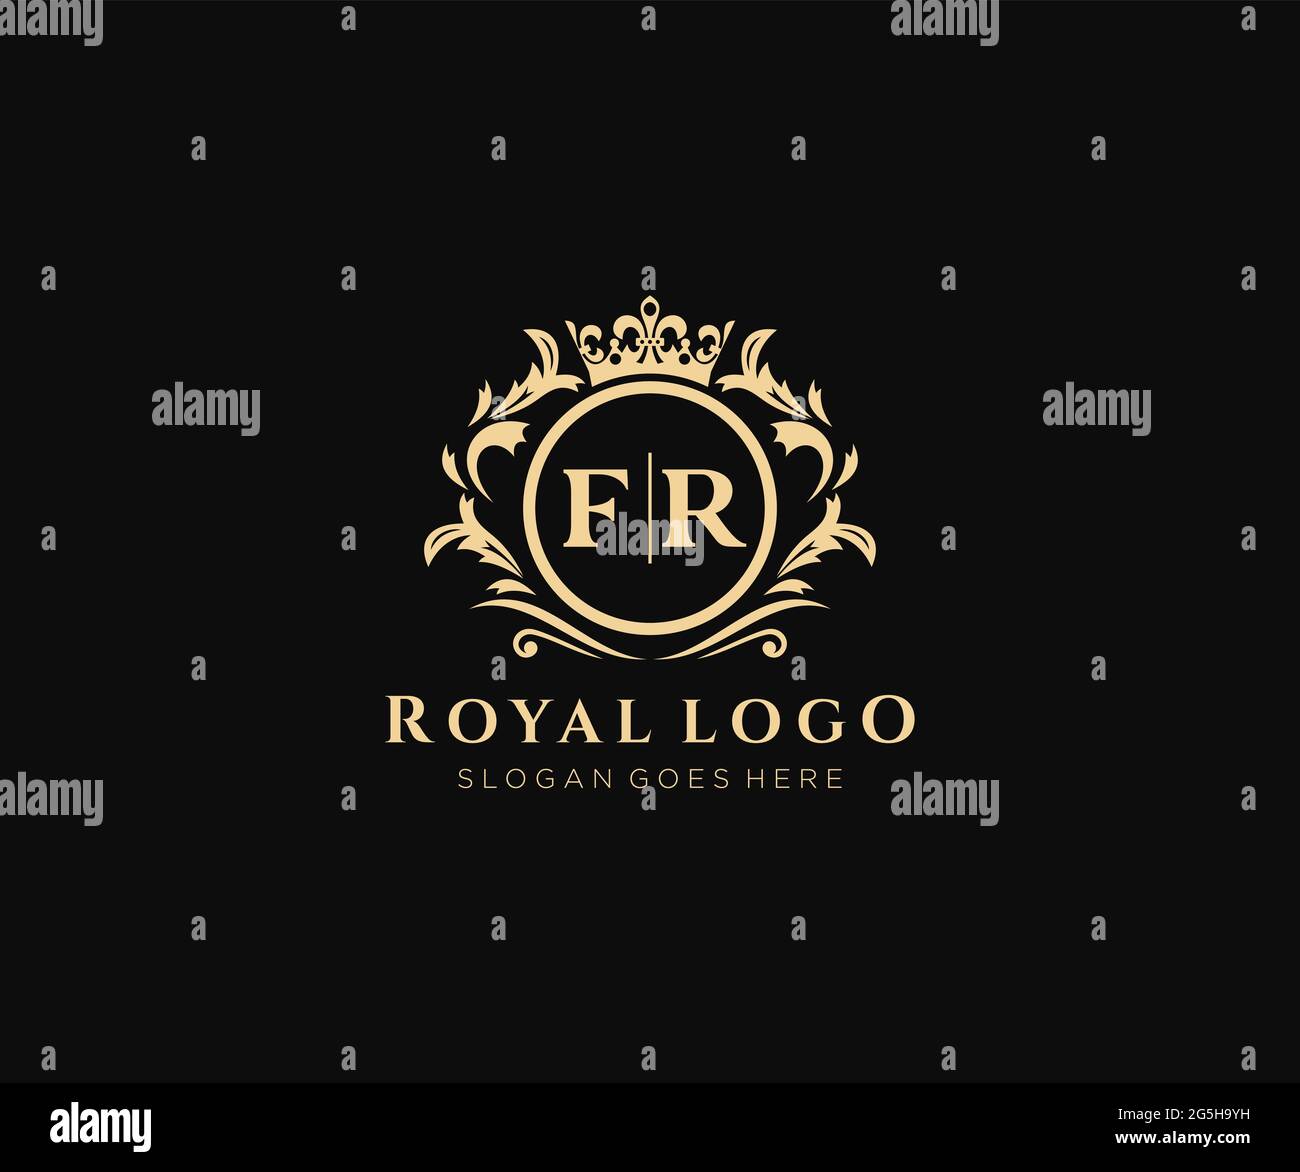 FR Letter Luxurious Brand Logo Template, for Restaurant, Royalty, Boutique, Cafe, Hotel, Heraldic, Jewelry, Fashion and other vector illustration. Stock Vector